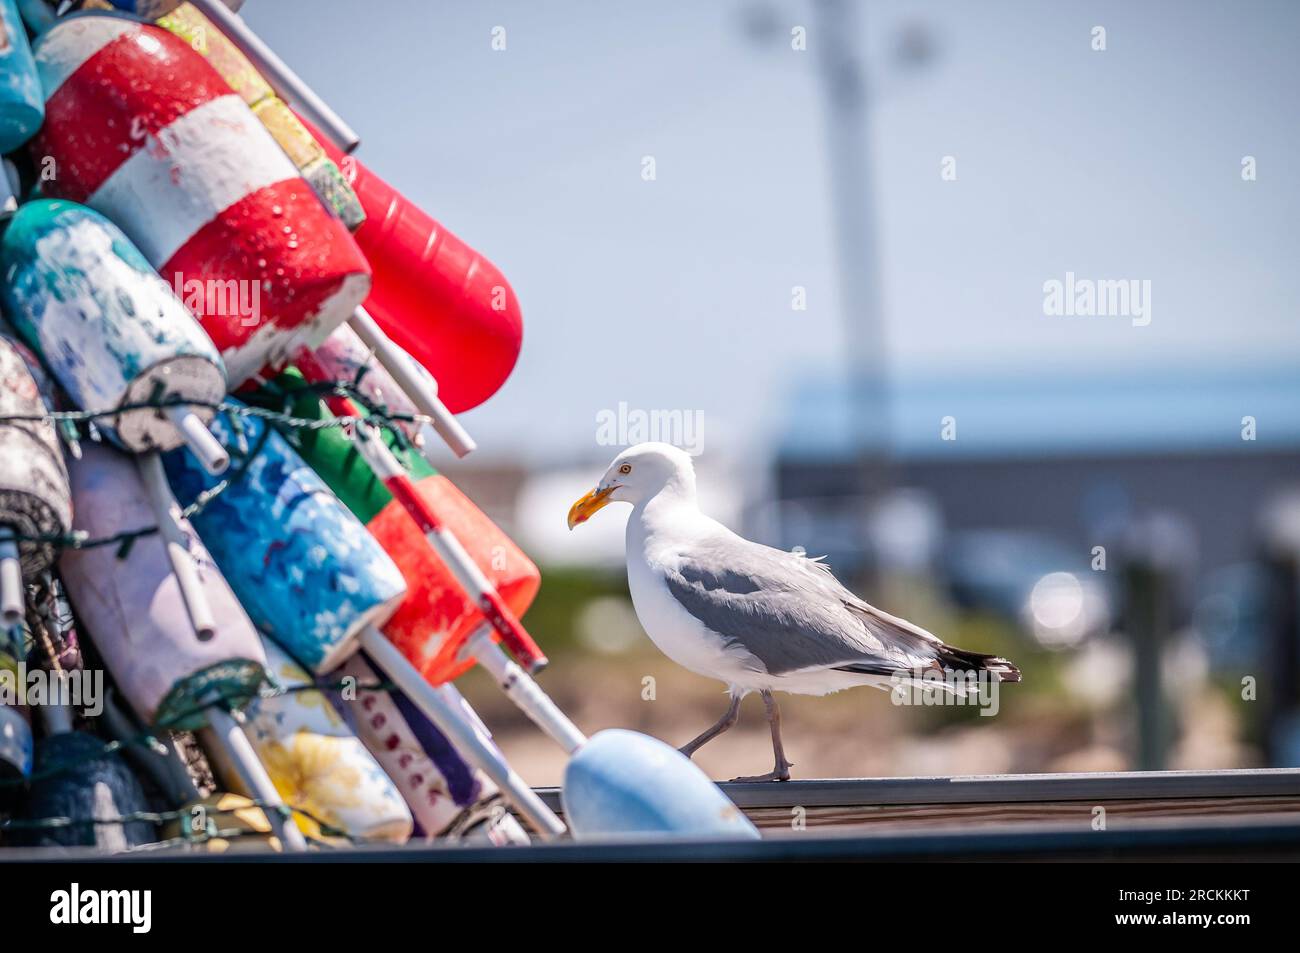 Not Boys and Girls, but Buoys and Gull. This gull was more interested in  the pile of lobster buoys than food from the fishing boats unloading. Stock Photo